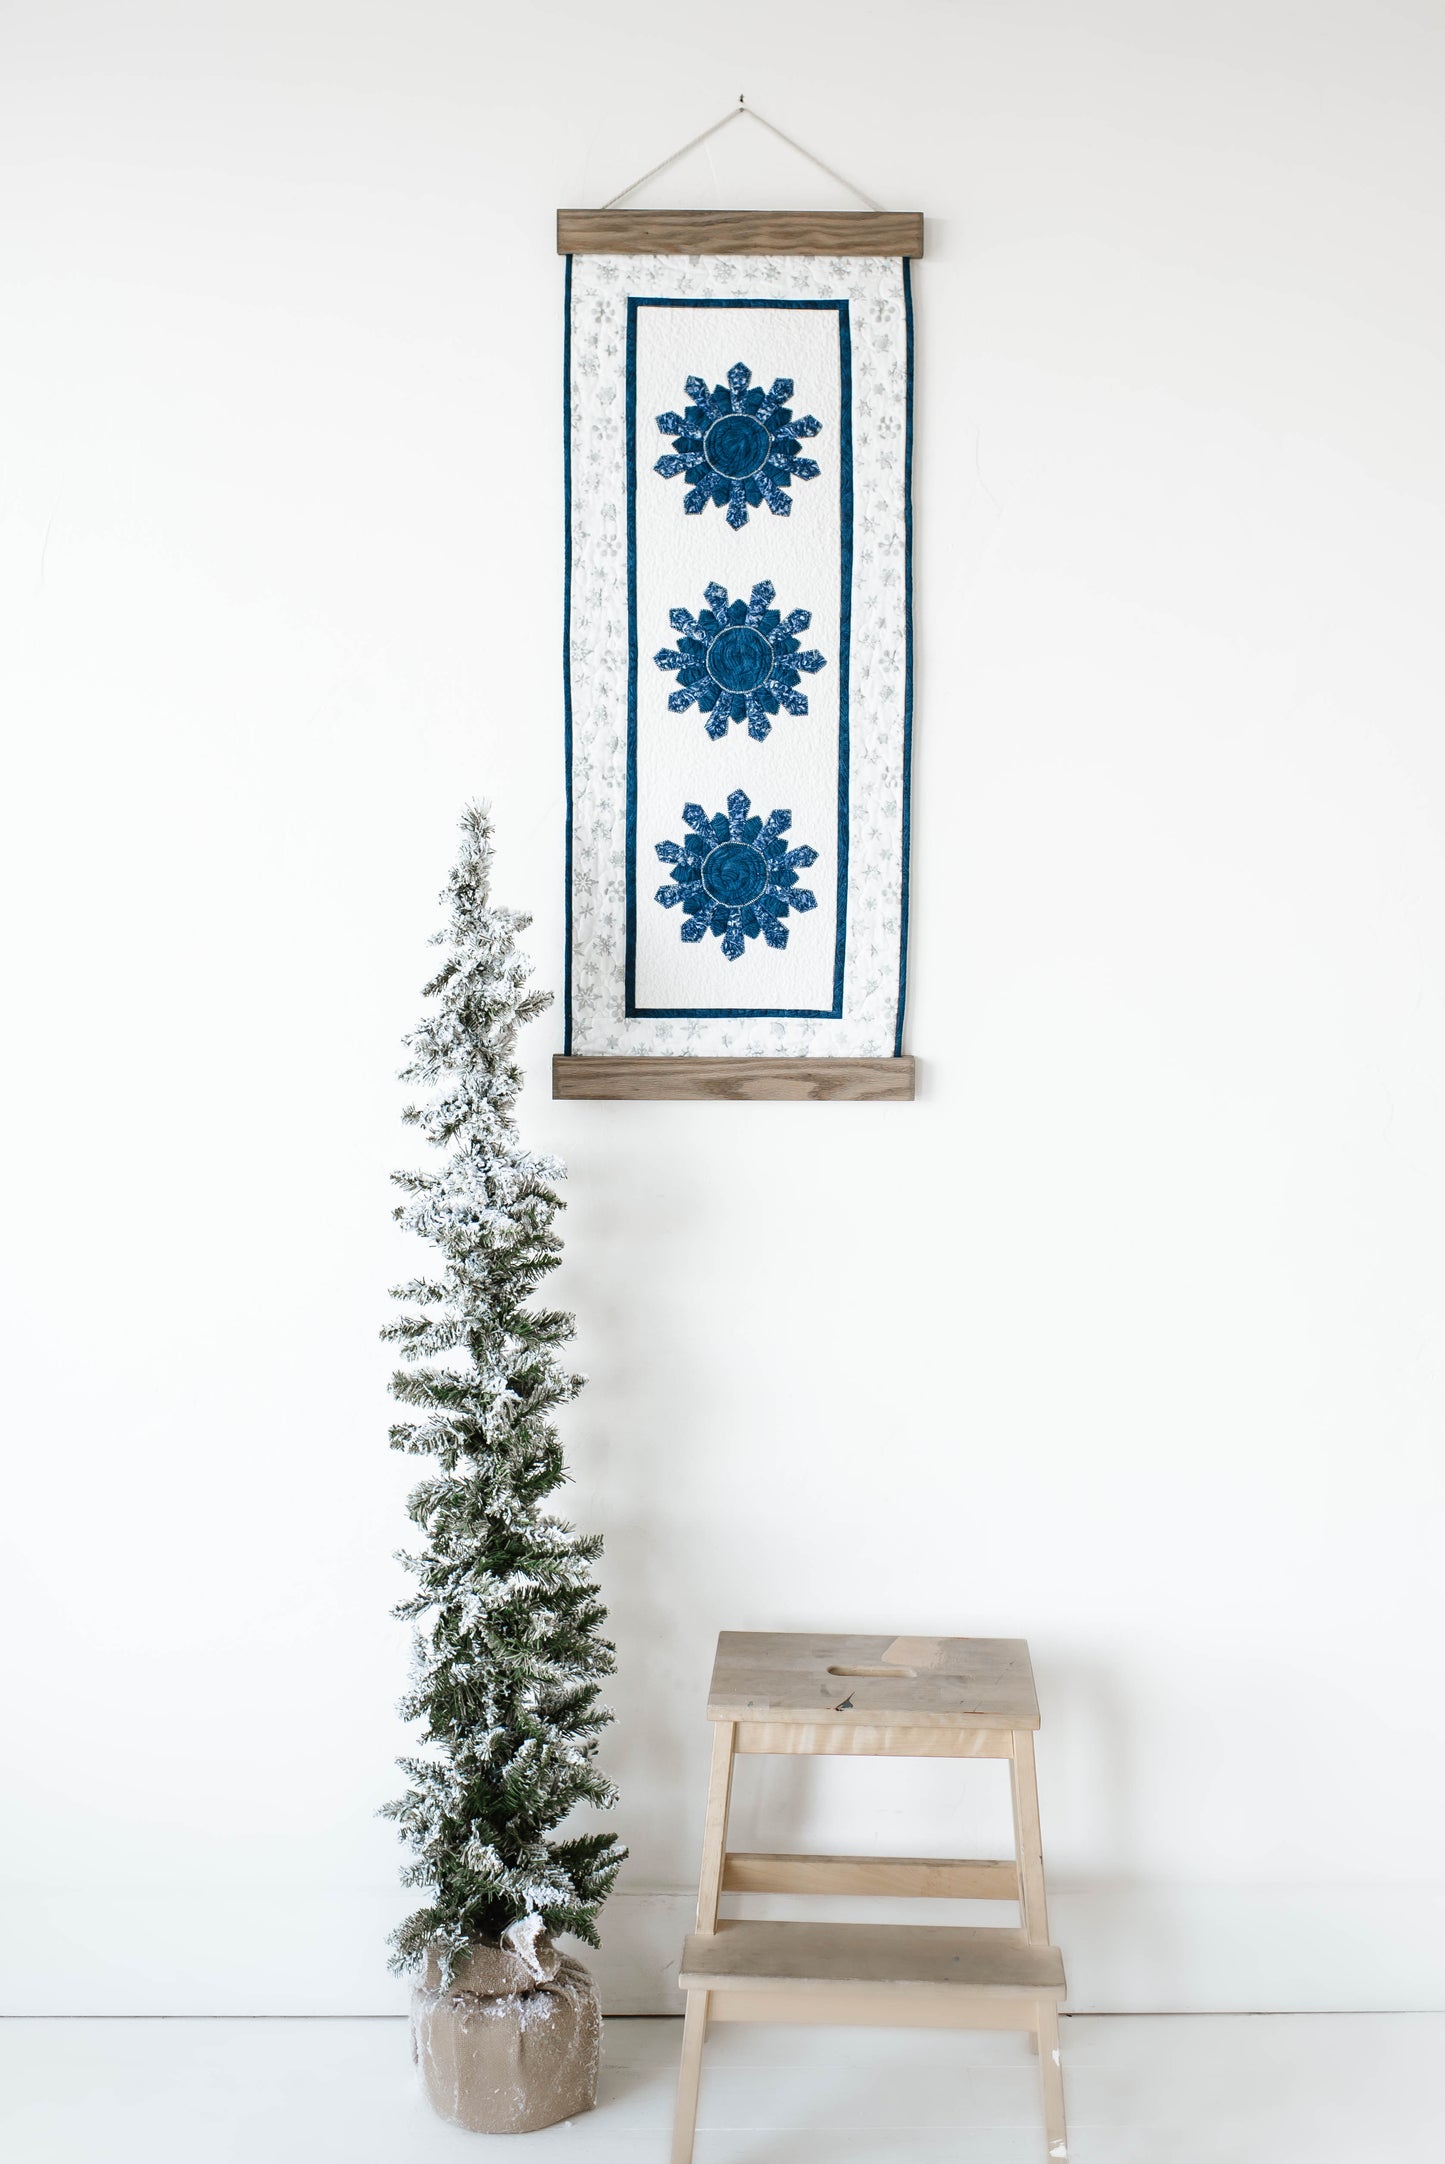 Quilt Wall Hanging